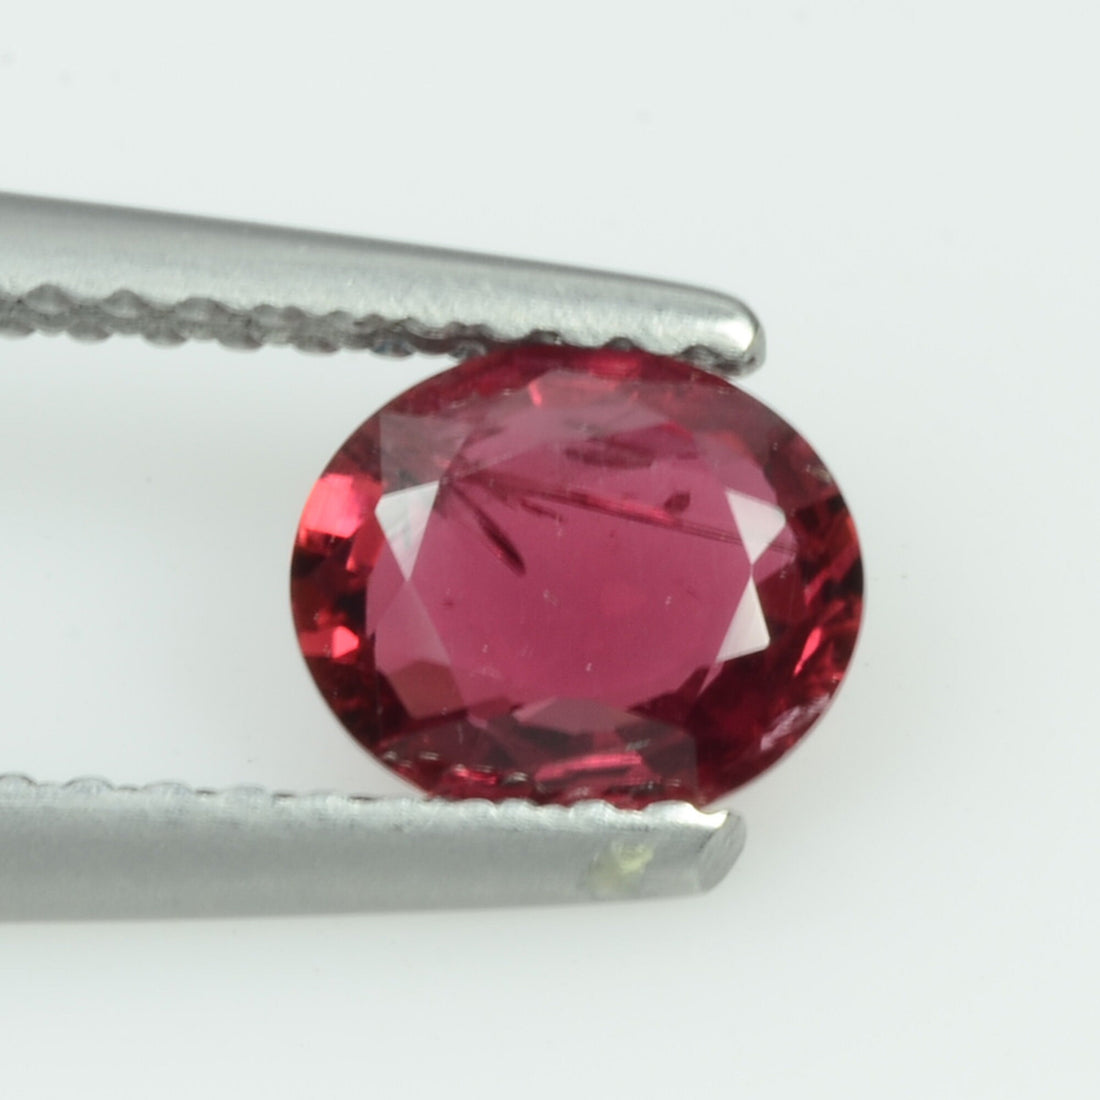 0.76 cts Natural Ruby Loose Gemstone Oval Cut